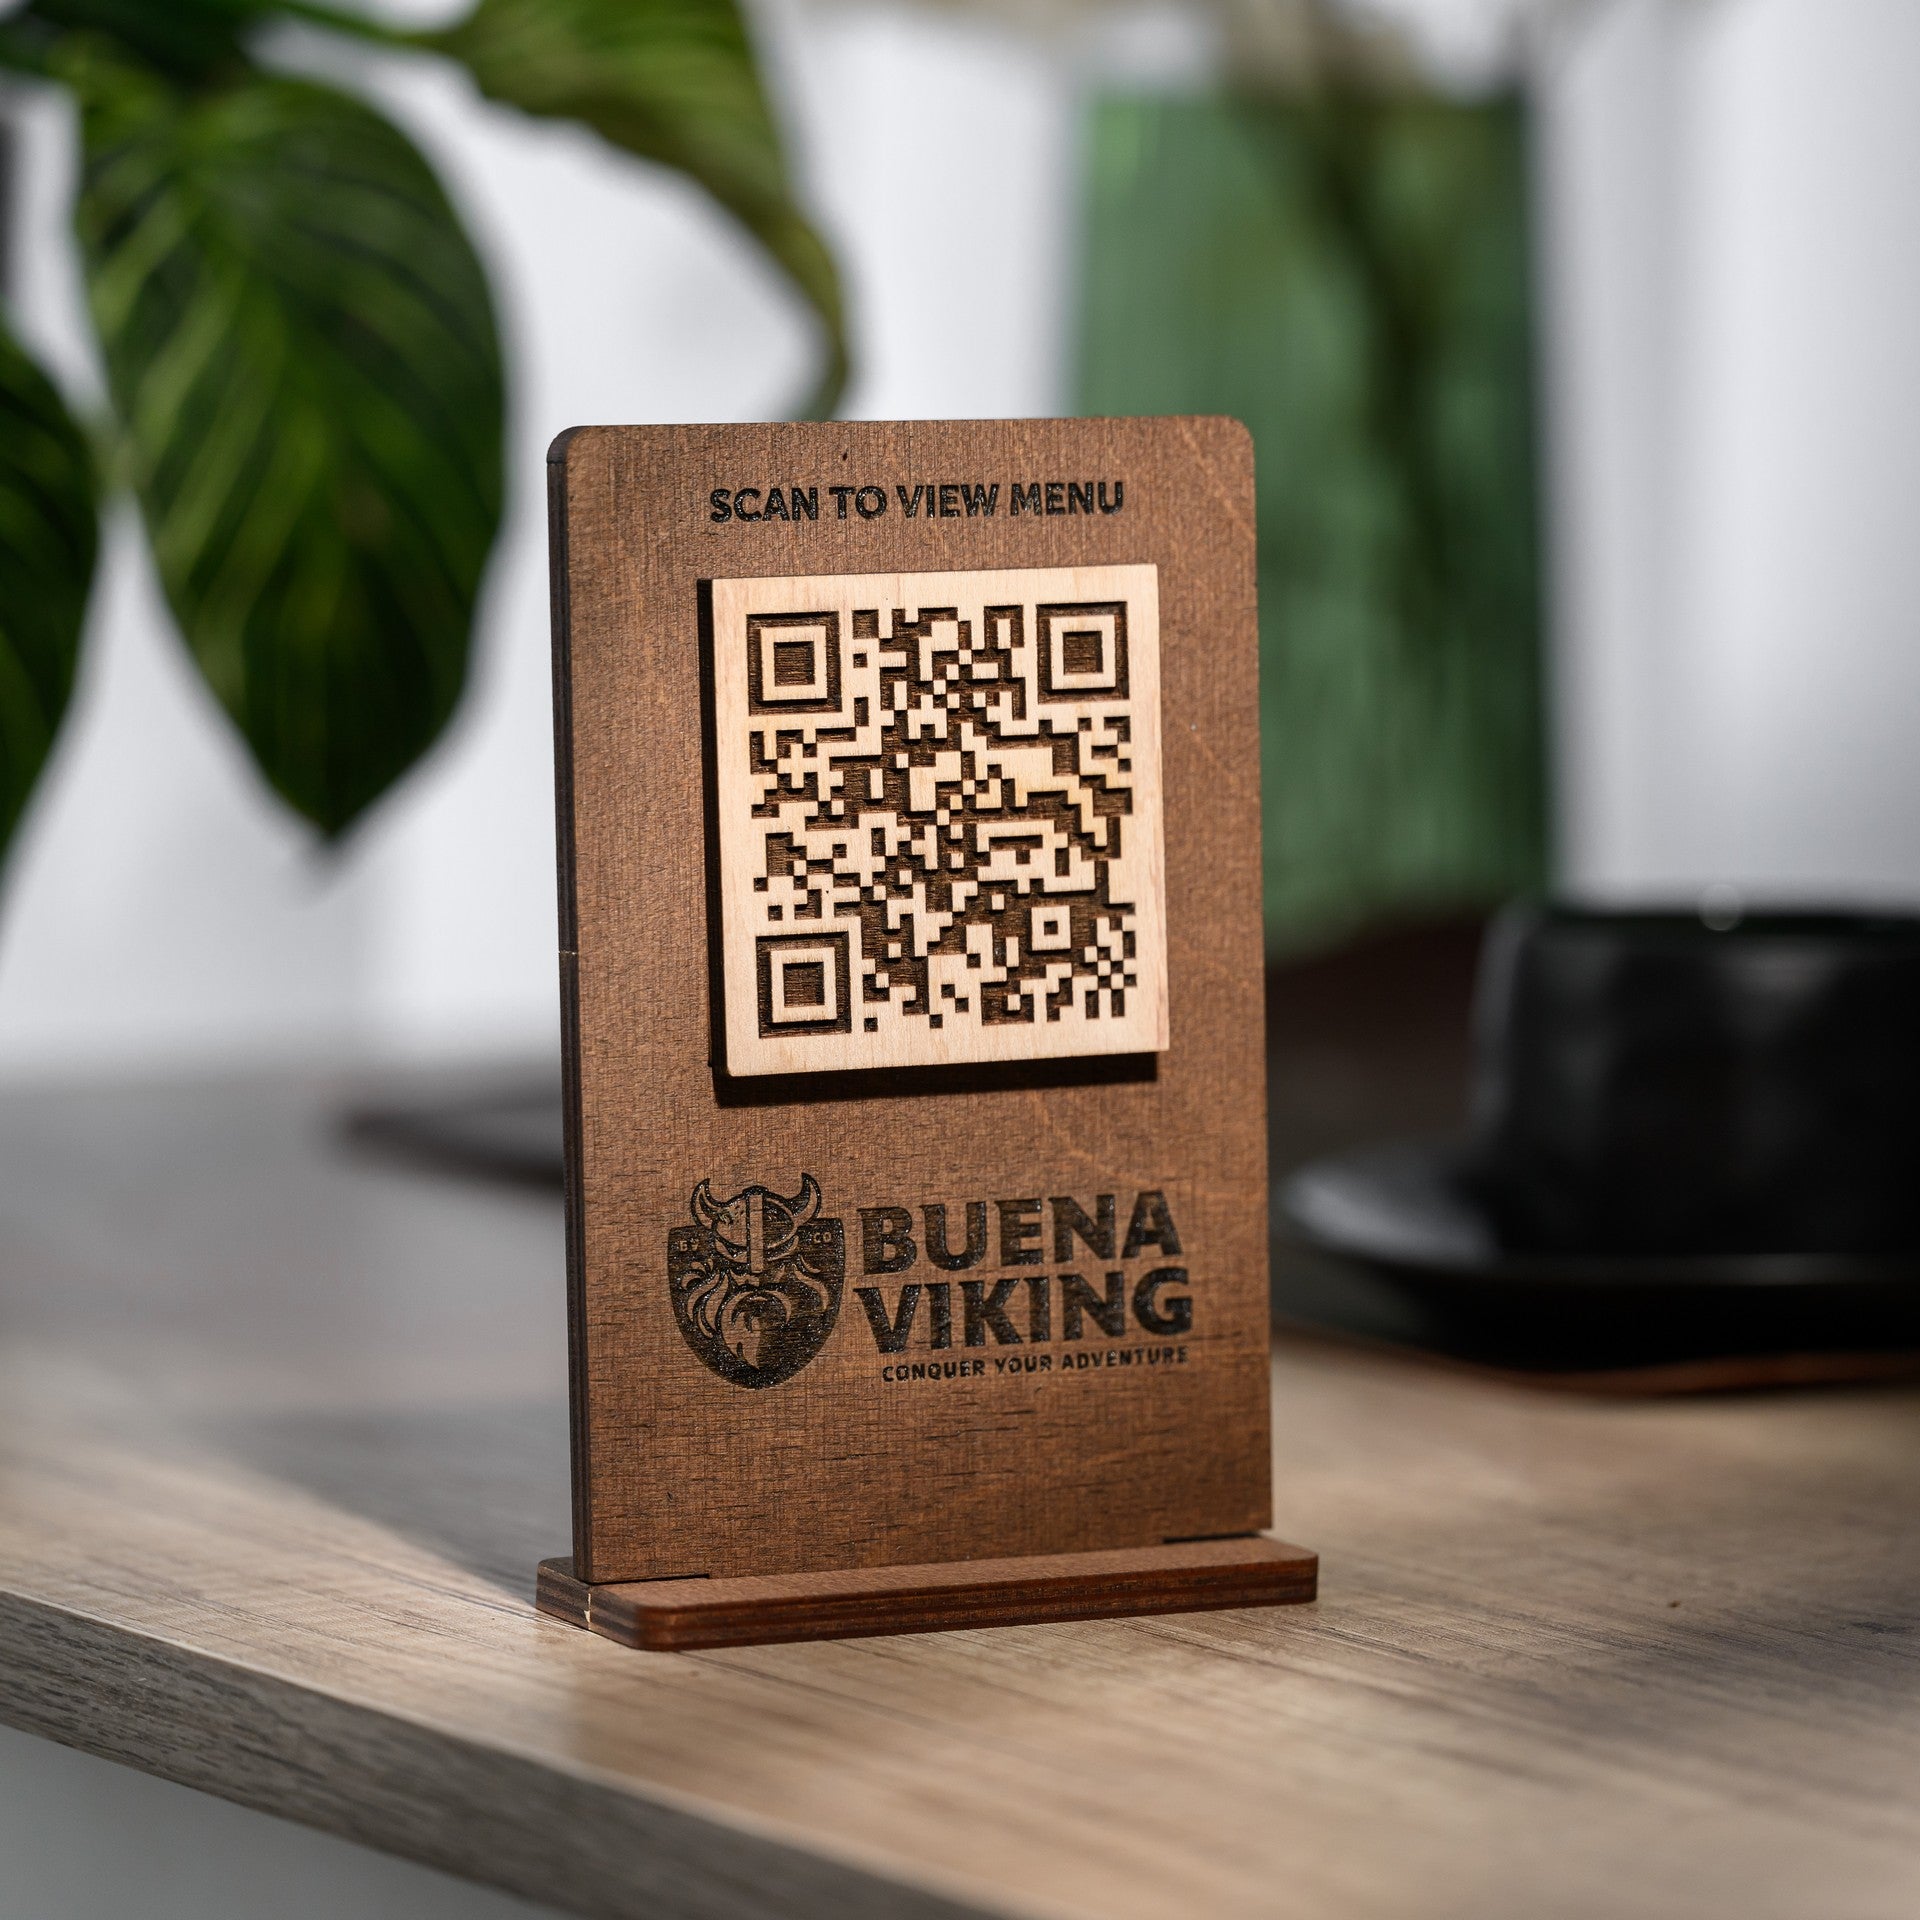 Menu QR Sign Stand for quick and easy menu access. Ideal for desktops in cafes and bars, offering a touchless menu experience.